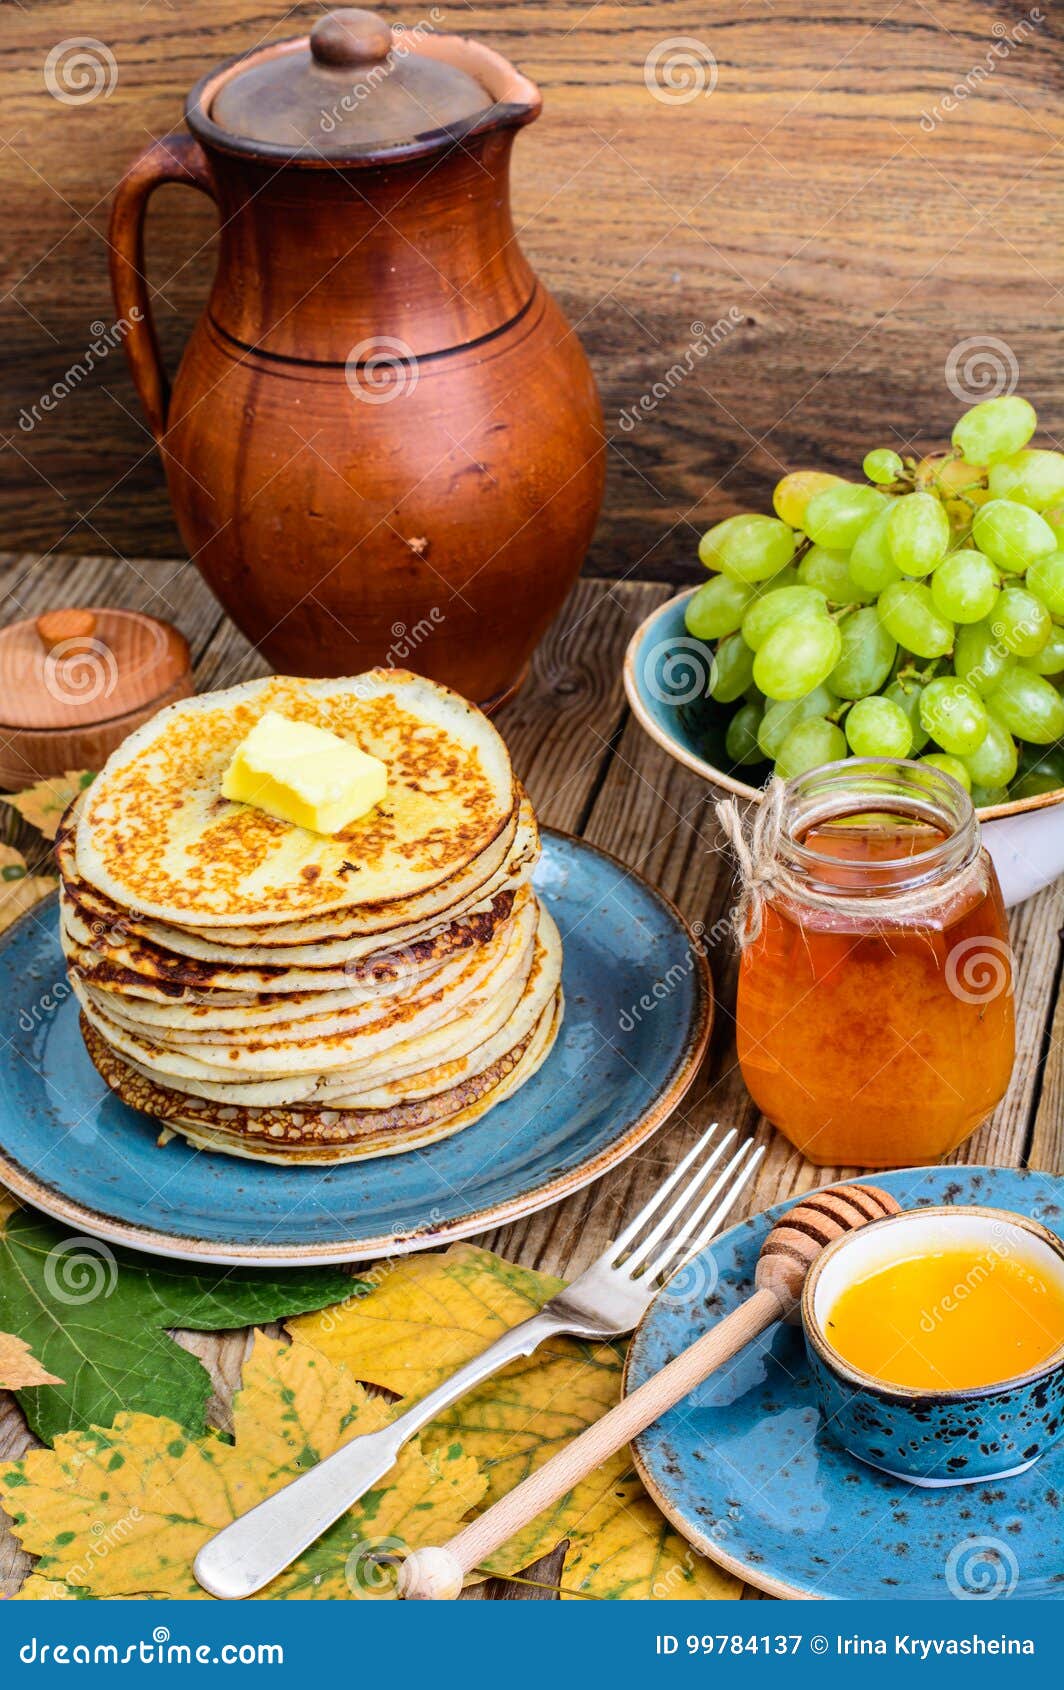 Pancakes for Thanksgiving Dinner Stock Image - Image of pancakes, clay ...